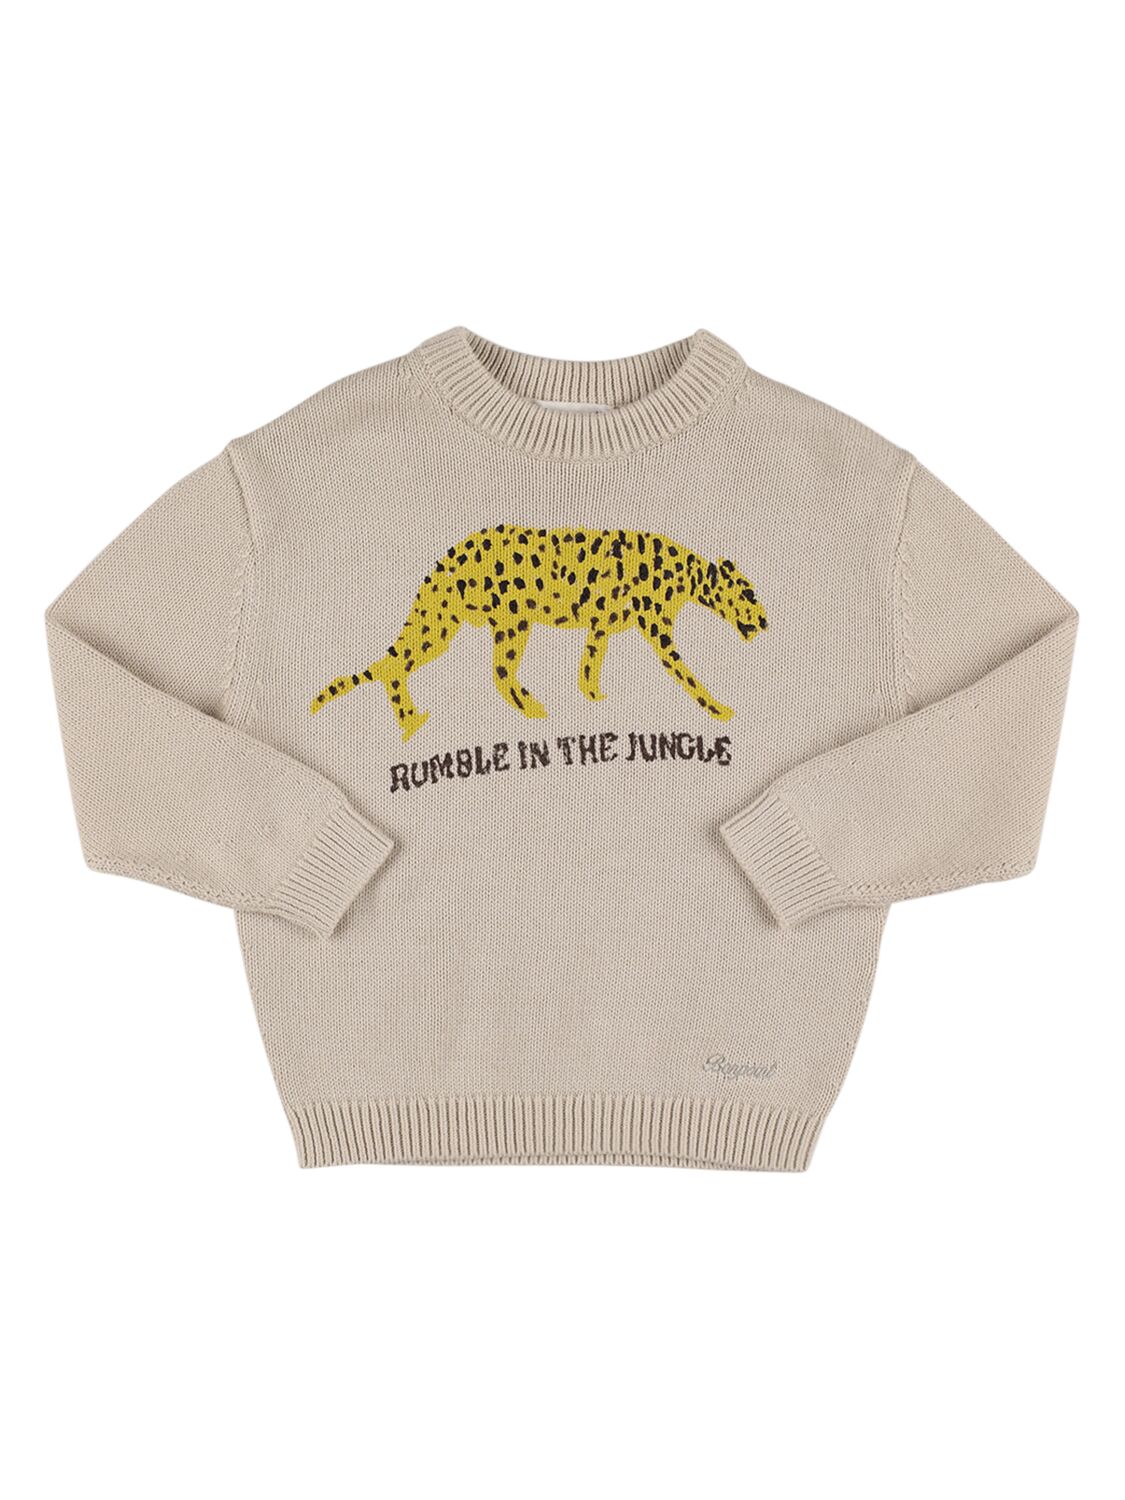 Bonpoint Kids' Printed Cotton Knit Sweater In Grey,multi